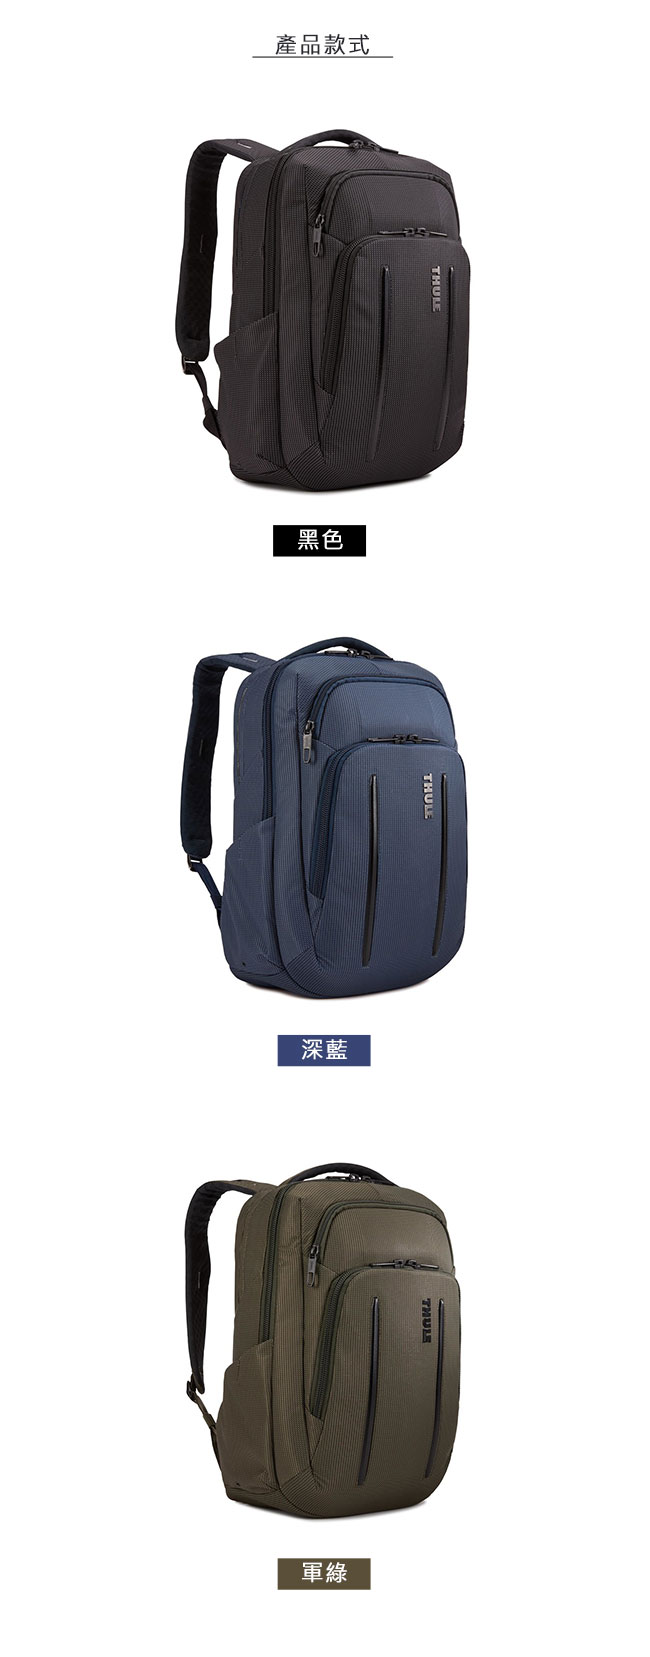 Thule Crossover 2 Backpack 20L 跨界後背包 - 黑色